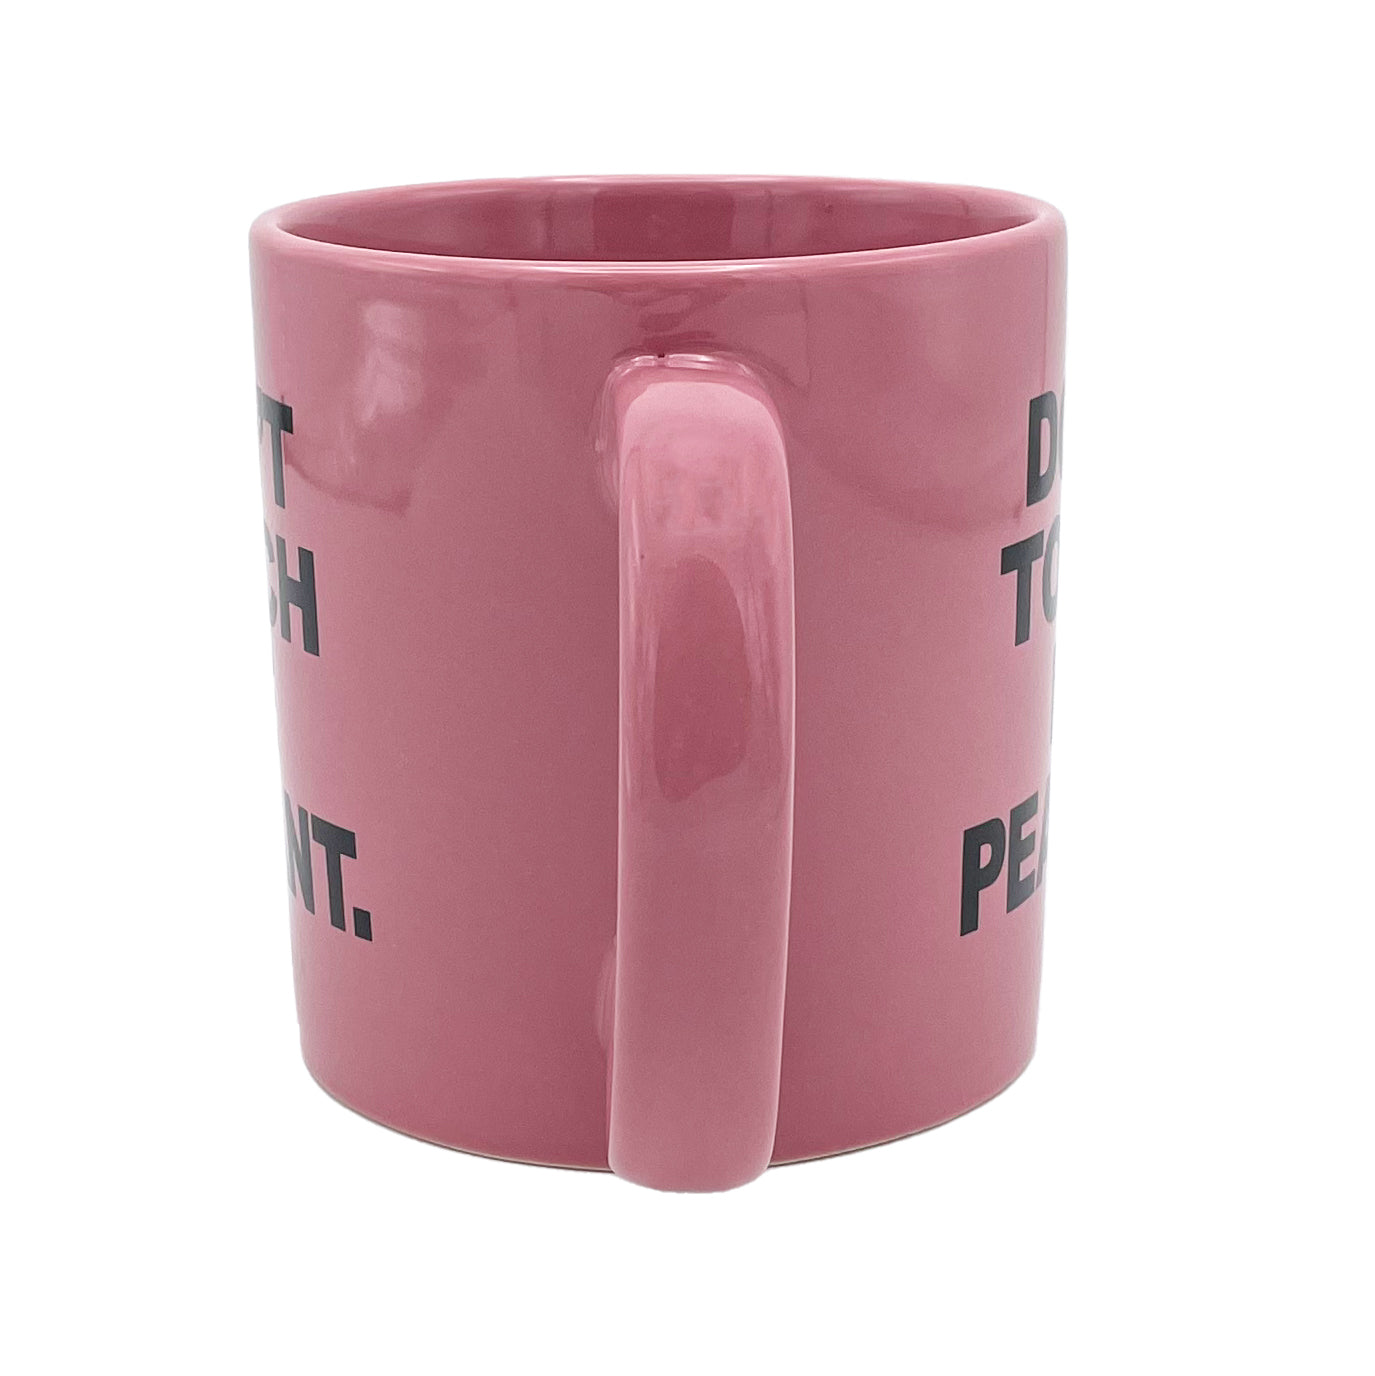 Giant Don't Touch Me Peasant Mug - Pink